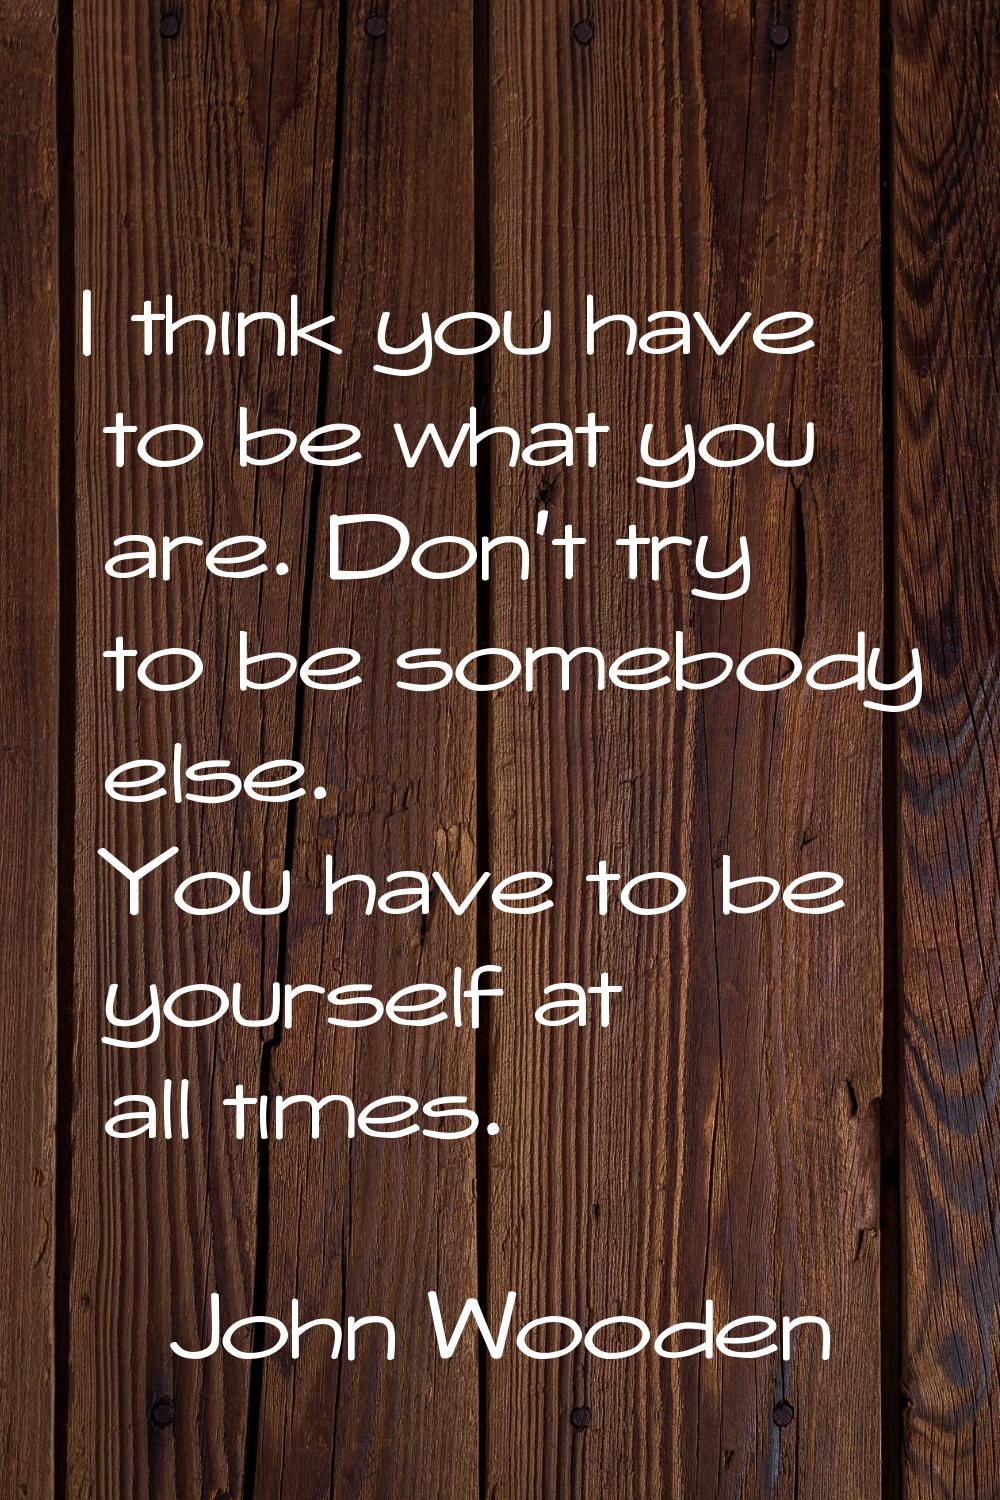 I think you have to be what you are. Don't try to be somebody else. You have to be yourself at all 